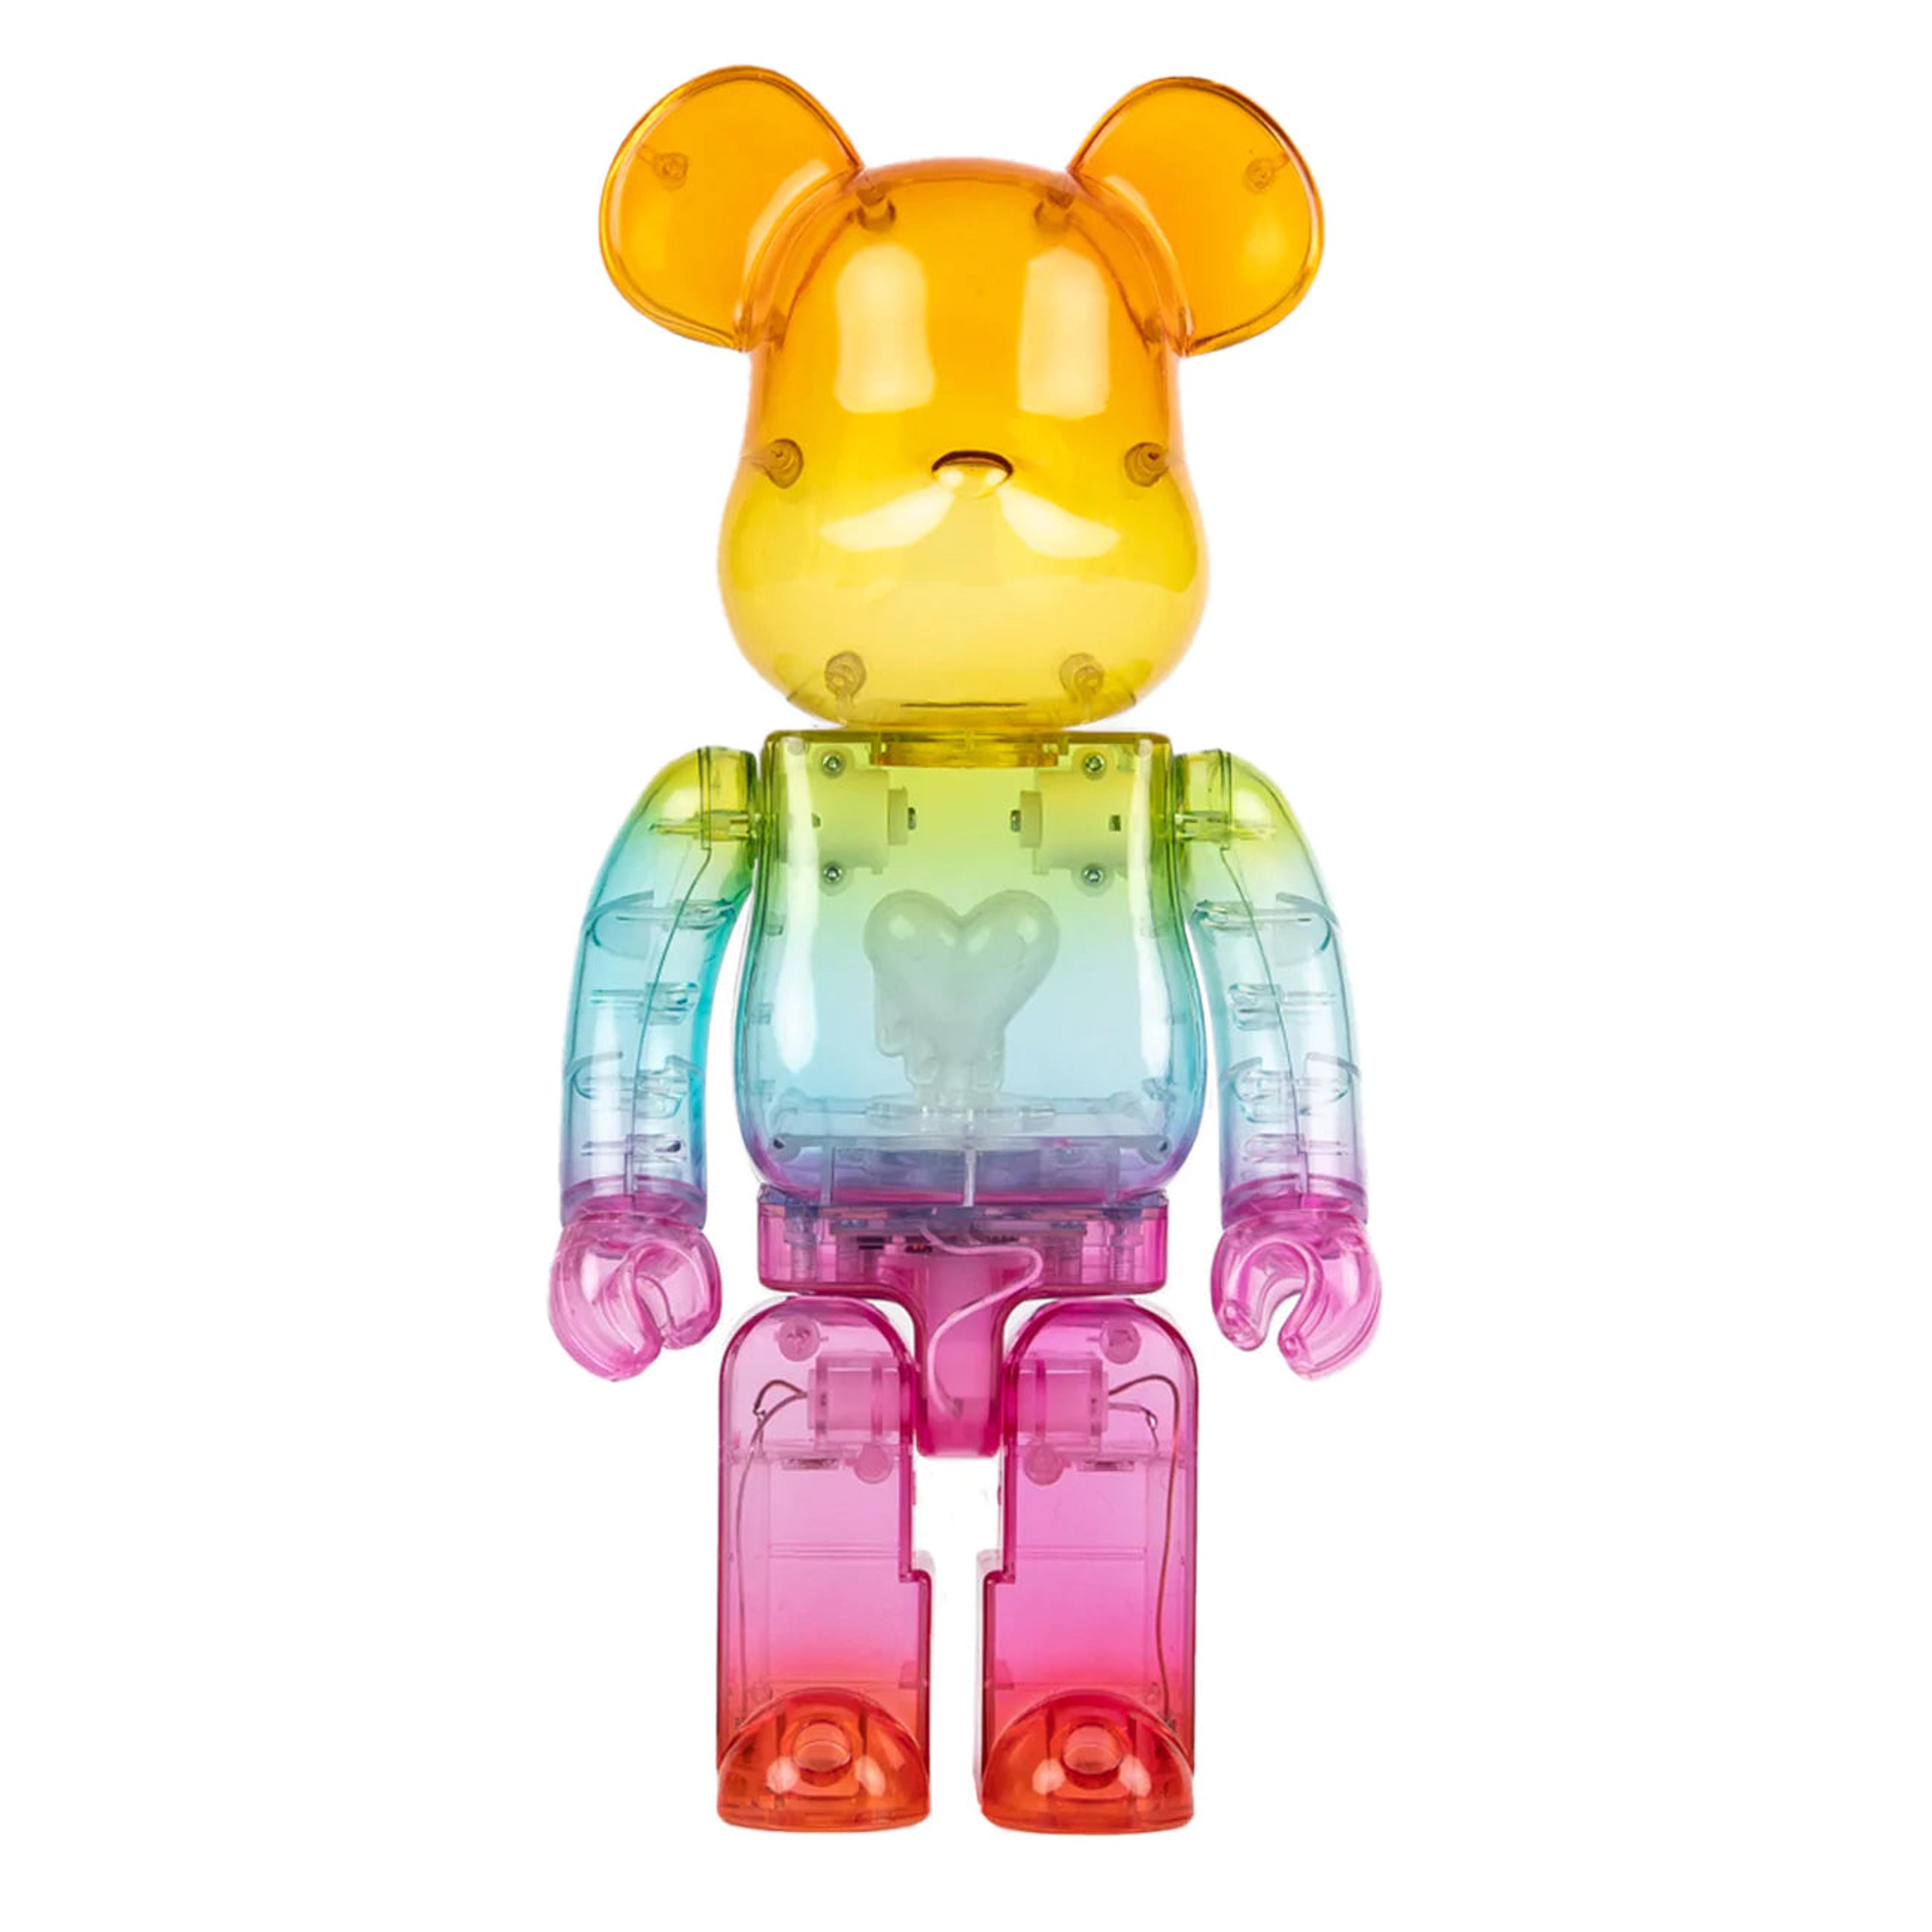 Alternate View 1 of Emotionally Unavailable Gradient BE@RBRICK 1000%